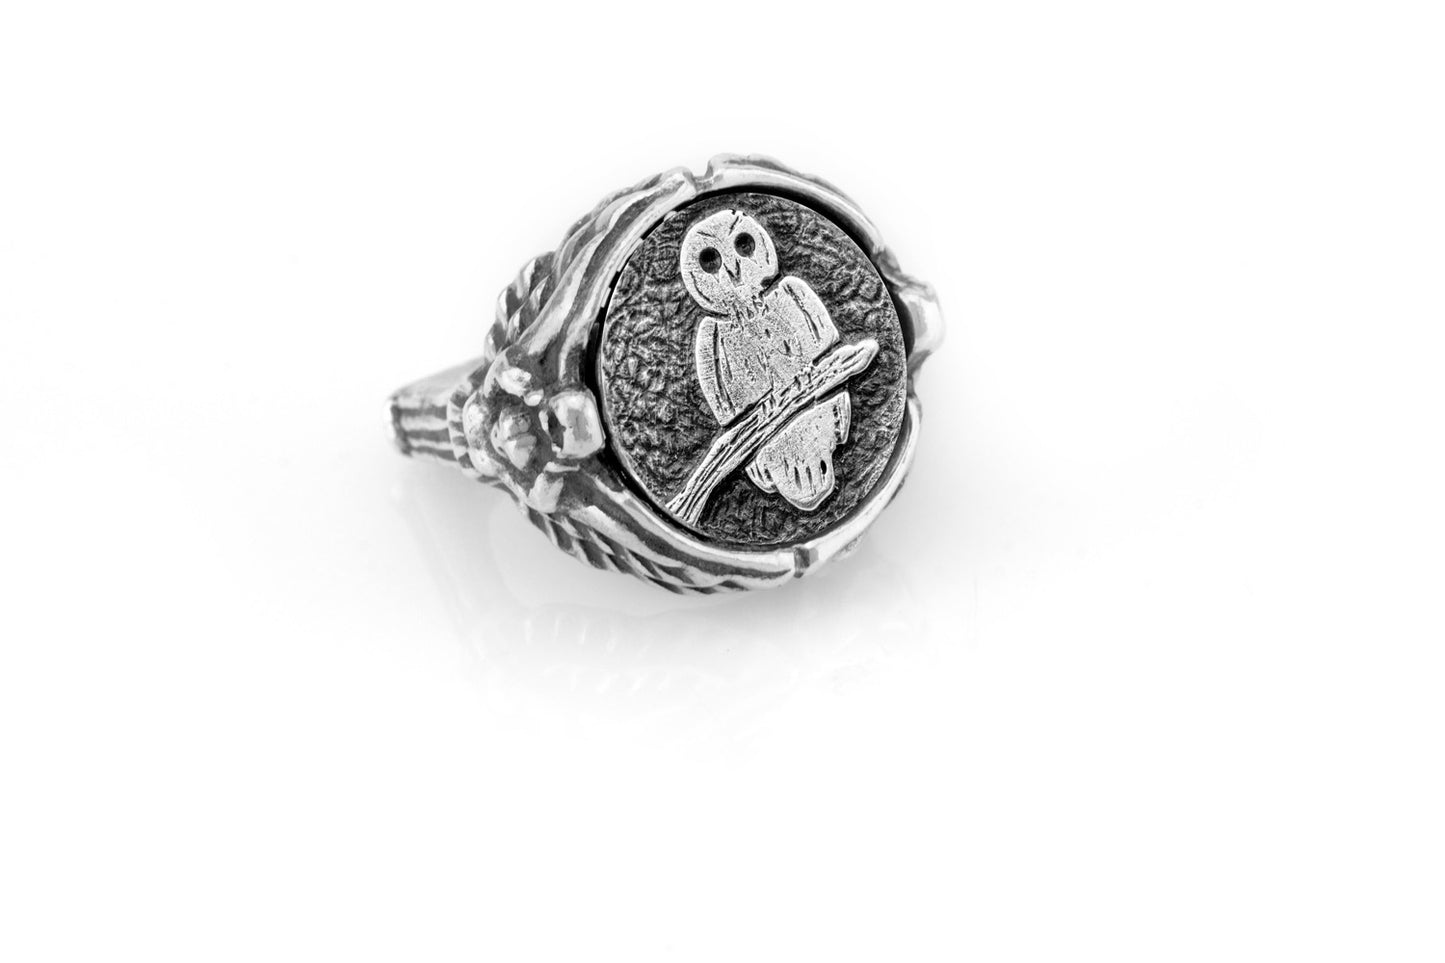 coin ring with the Owl medallion on Nike ring  Owl “Nike” Ring